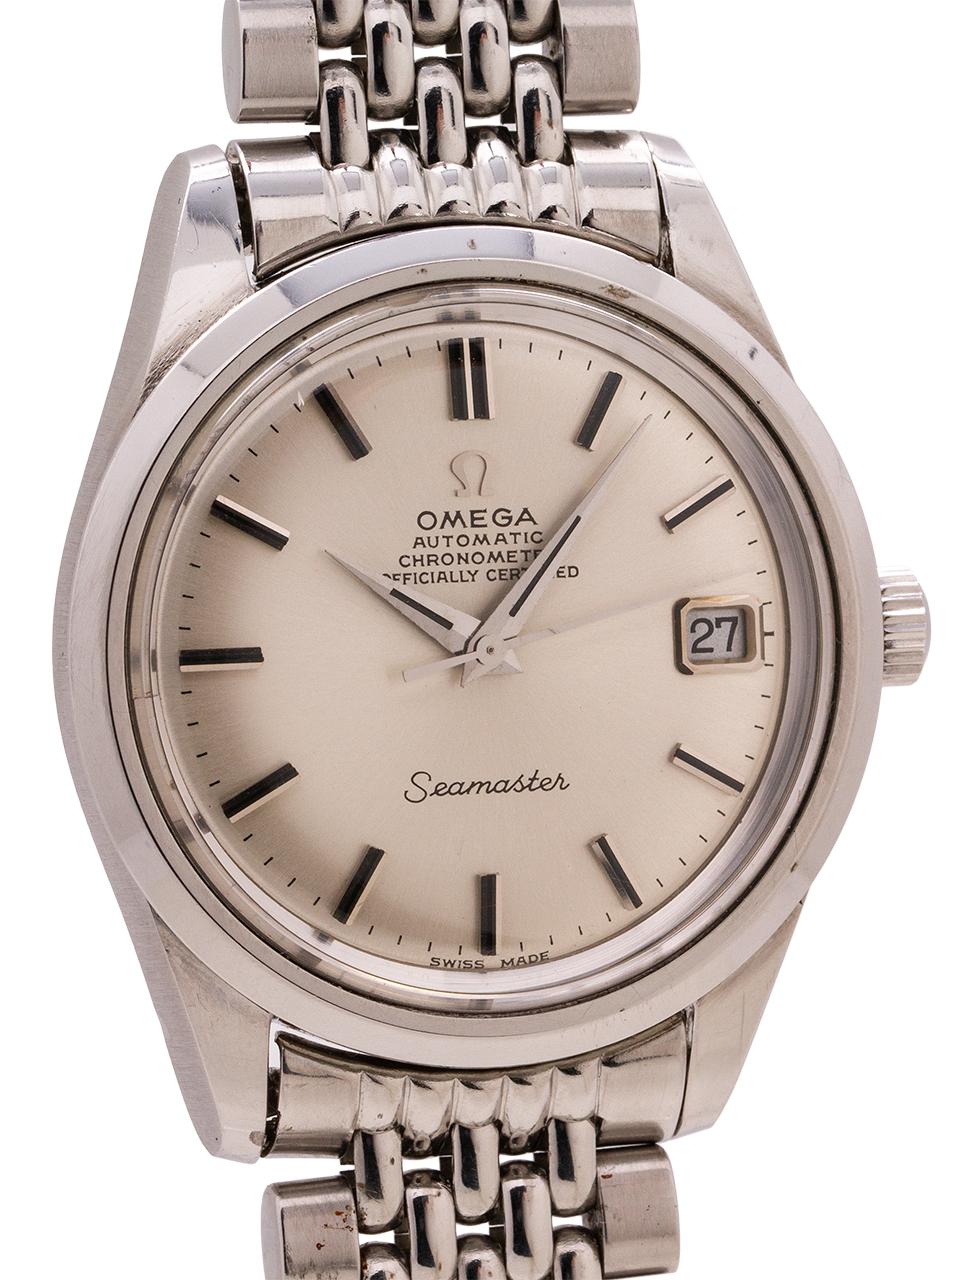 
A truly exceptional example Omega Seamaster automatic with date, ref 168.024, circa 1969. Featuring a robust 35mm stainless steel case with smooth wide bezel, substantial contoured lugs and acrylic crystal and signed crown. Deeply embossed Omega